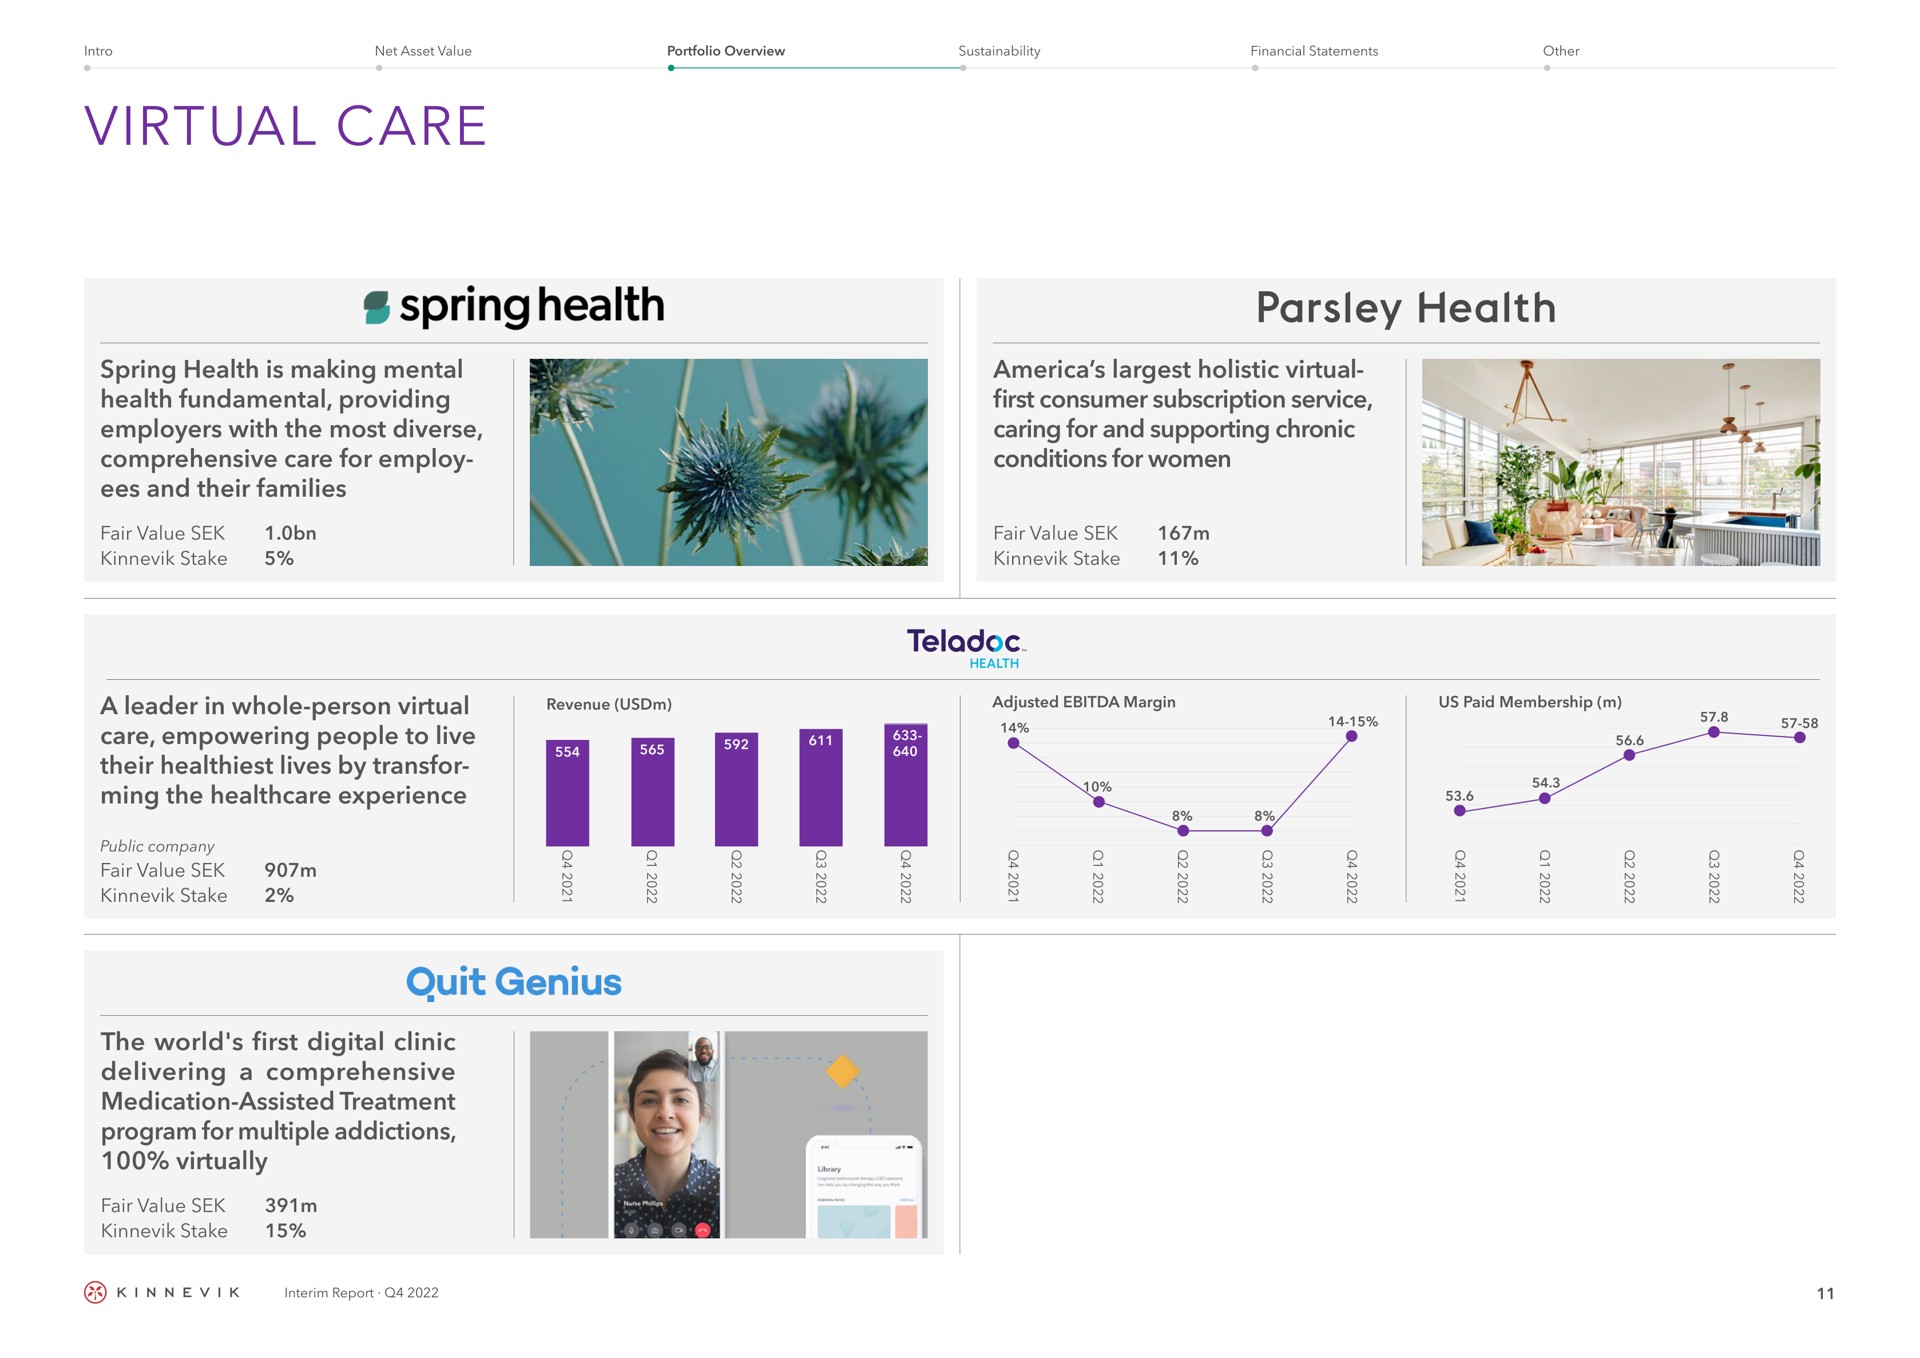 virtual care spring health is making mental health fundamental providing employers with the most diverse comprehensive care for employ and their families a leader in whole person virtual care empowering people to live their lives by ming the experience the world first digital clinic delivering a comprehensive medication assisted treatment program for multiple addictions virtually fair value holistic virtual first consumer subscription service caring for and supporting chronic conditions for women parsley stake quit genius | Kinnevik